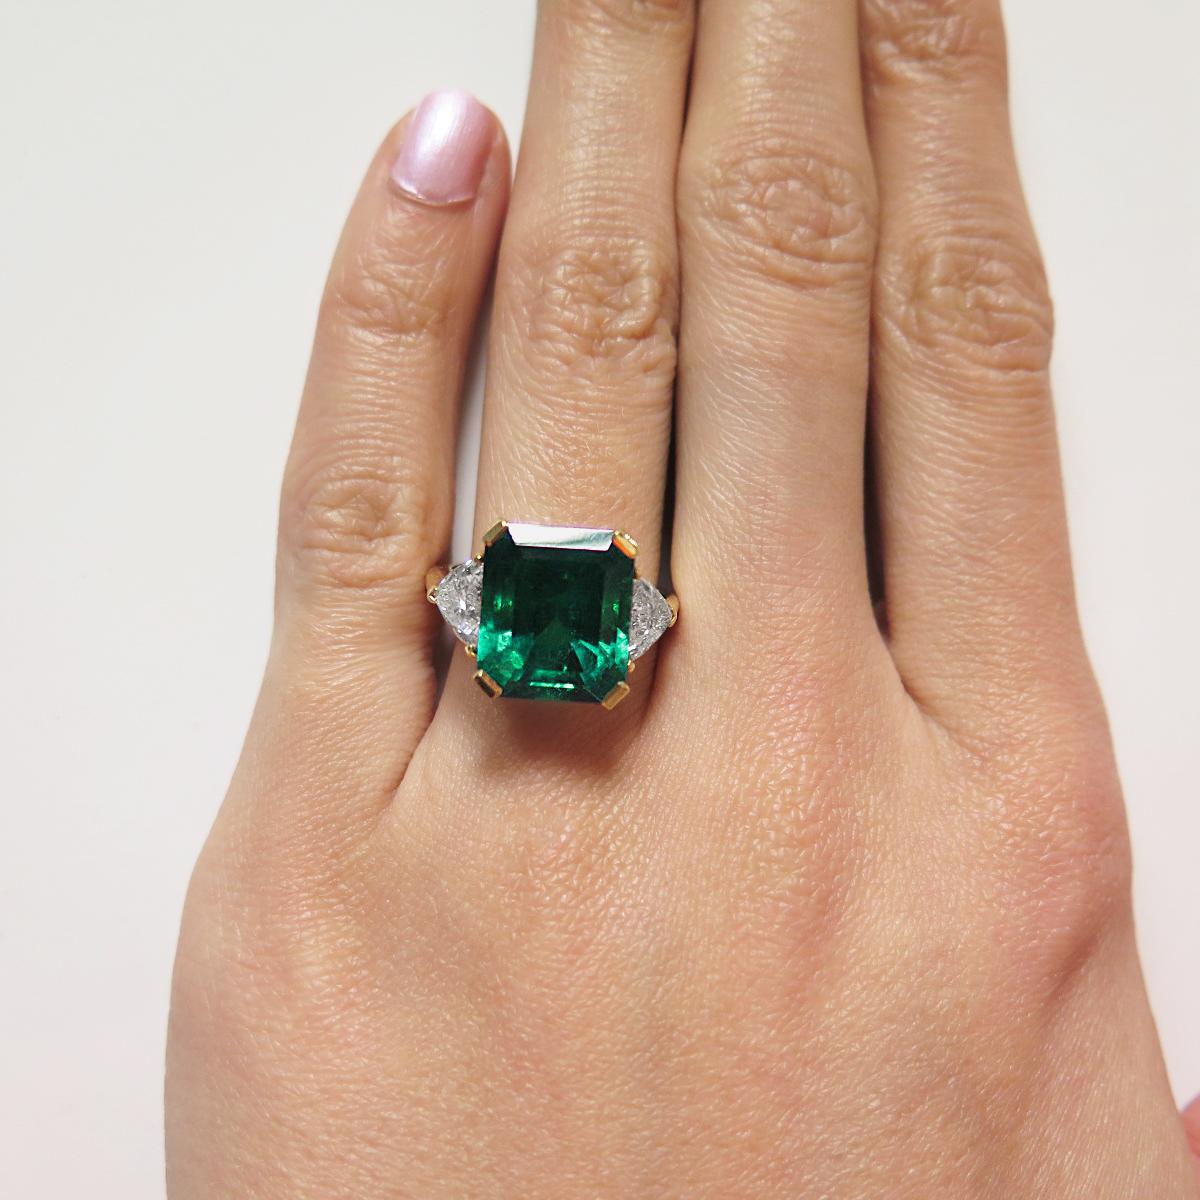 Emerald Cut Certified Colombian Emerald 7.75ct & Diamonds 3-Stone Ring in 18ct Gold, Vintage